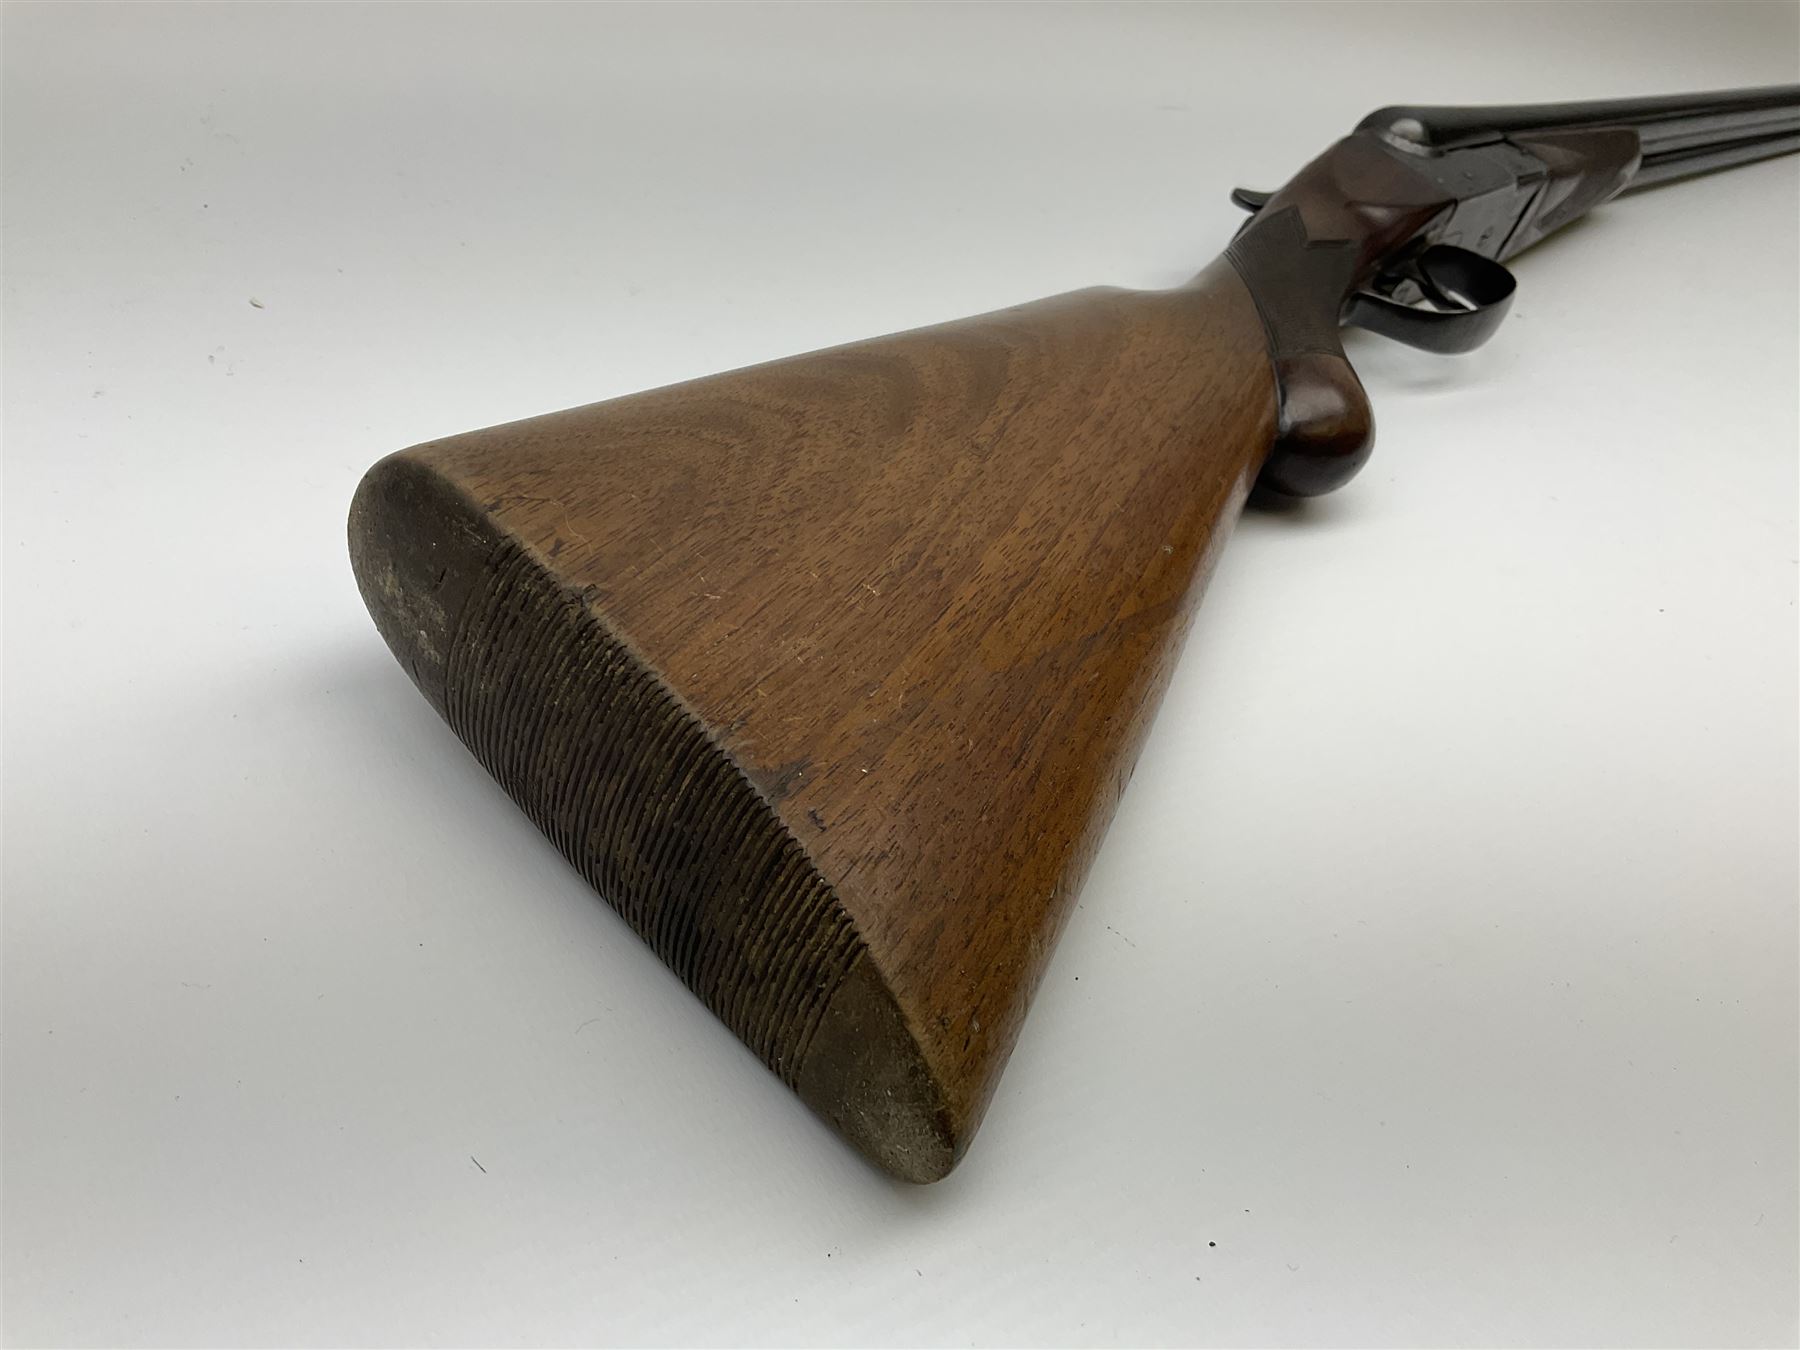 BSA 12-bore side-by-side double barrel box-lock ejector sporting gun with 76cm barrels - Image 2 of 12